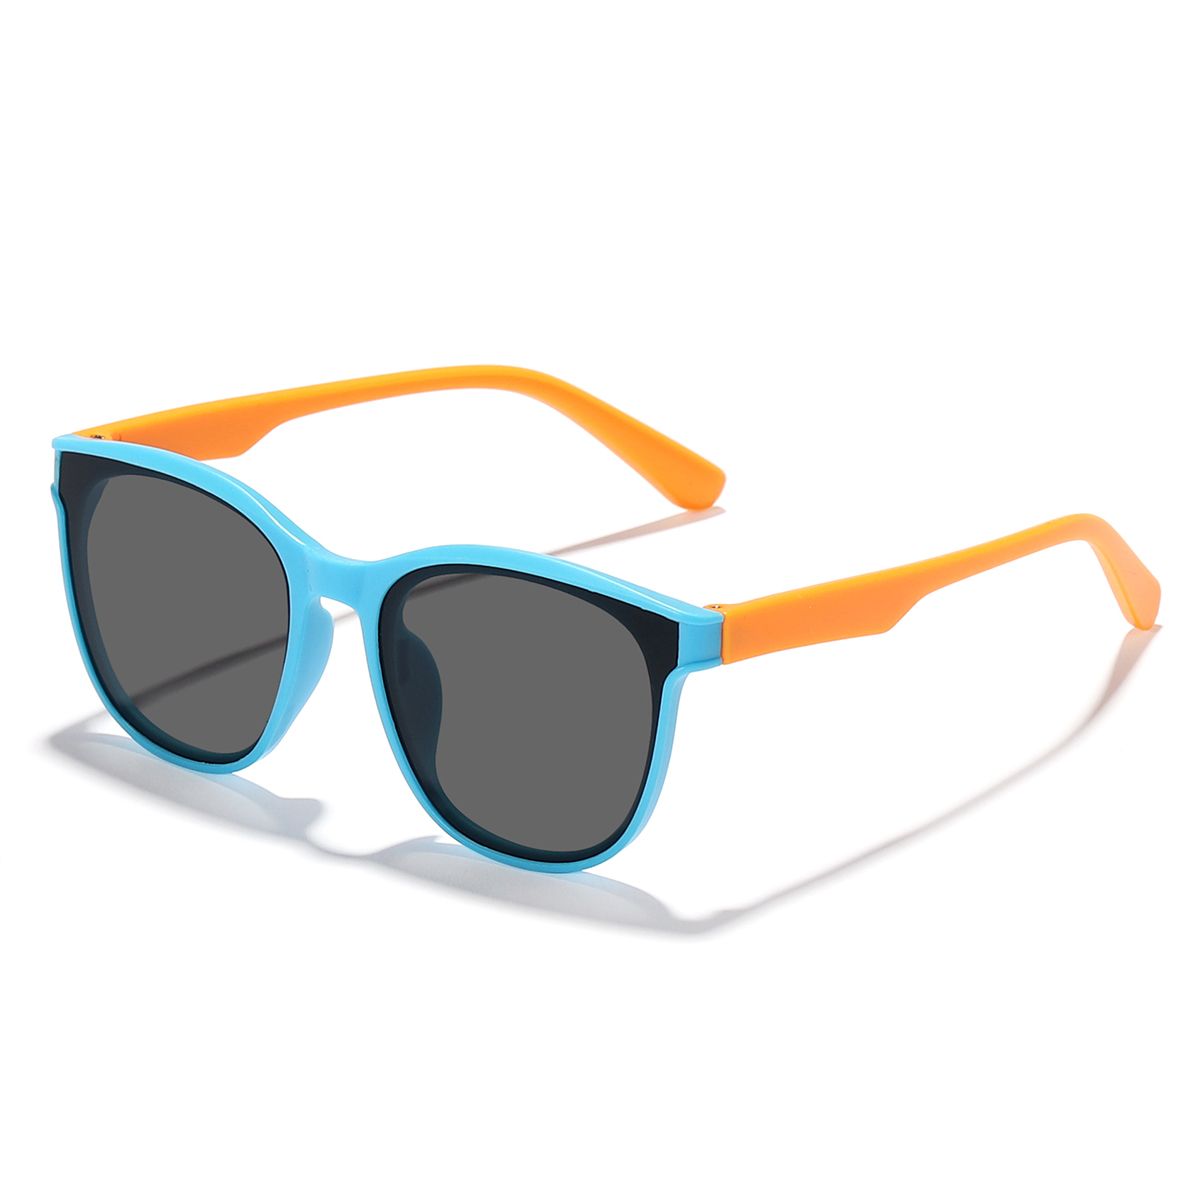 Toddler/kids Colorful and Stylish Outdoor Sunglasses (with Box)